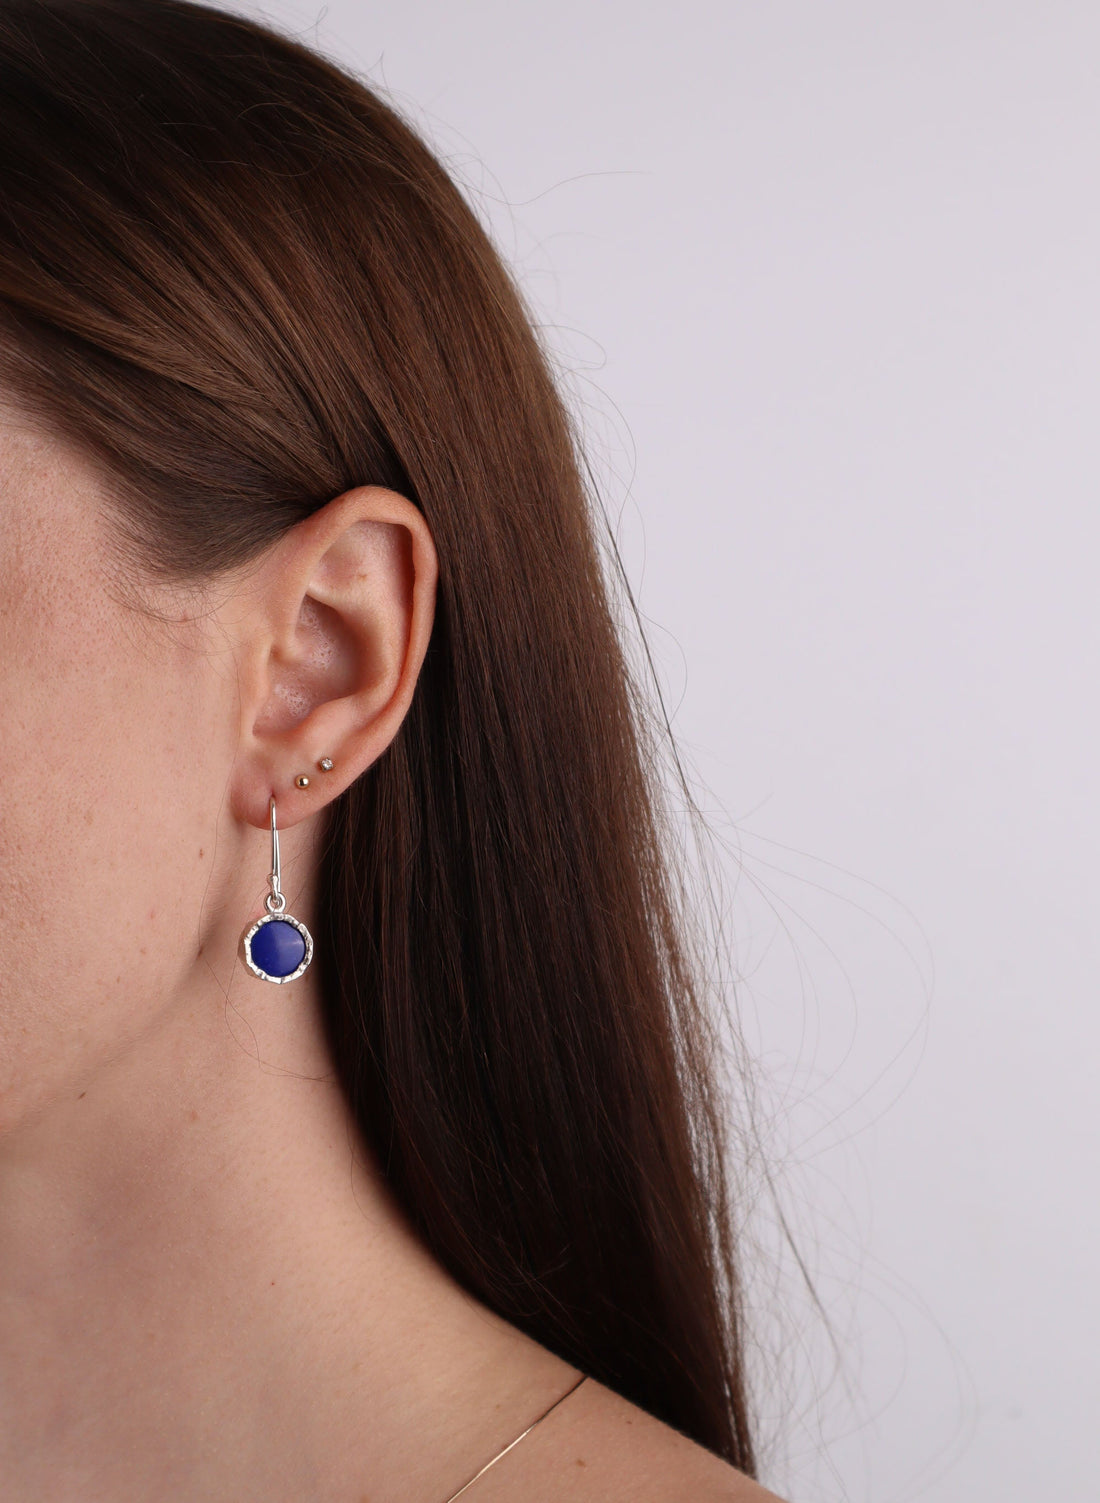 Round Lapis Earrings - Silver